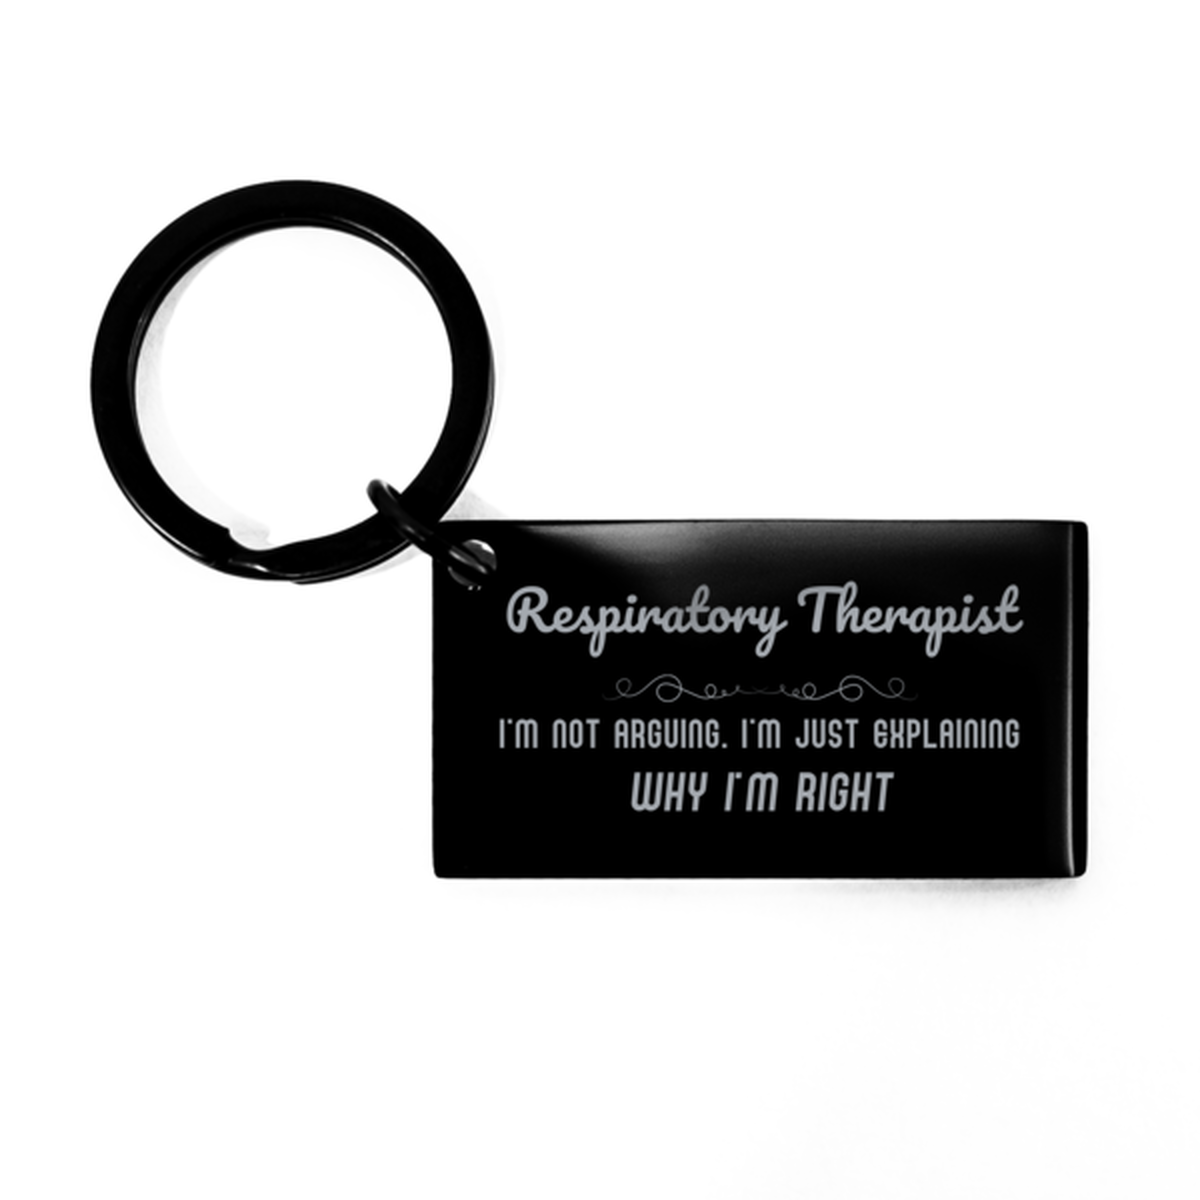 Respiratory Therapist I'm not Arguing. I'm Just Explaining Why I'm RIGHT Keychain, Funny Saying Quote Respiratory Therapist Gifts For Respiratory Therapist Graduation Birthday Christmas Gifts for Men Women Coworker